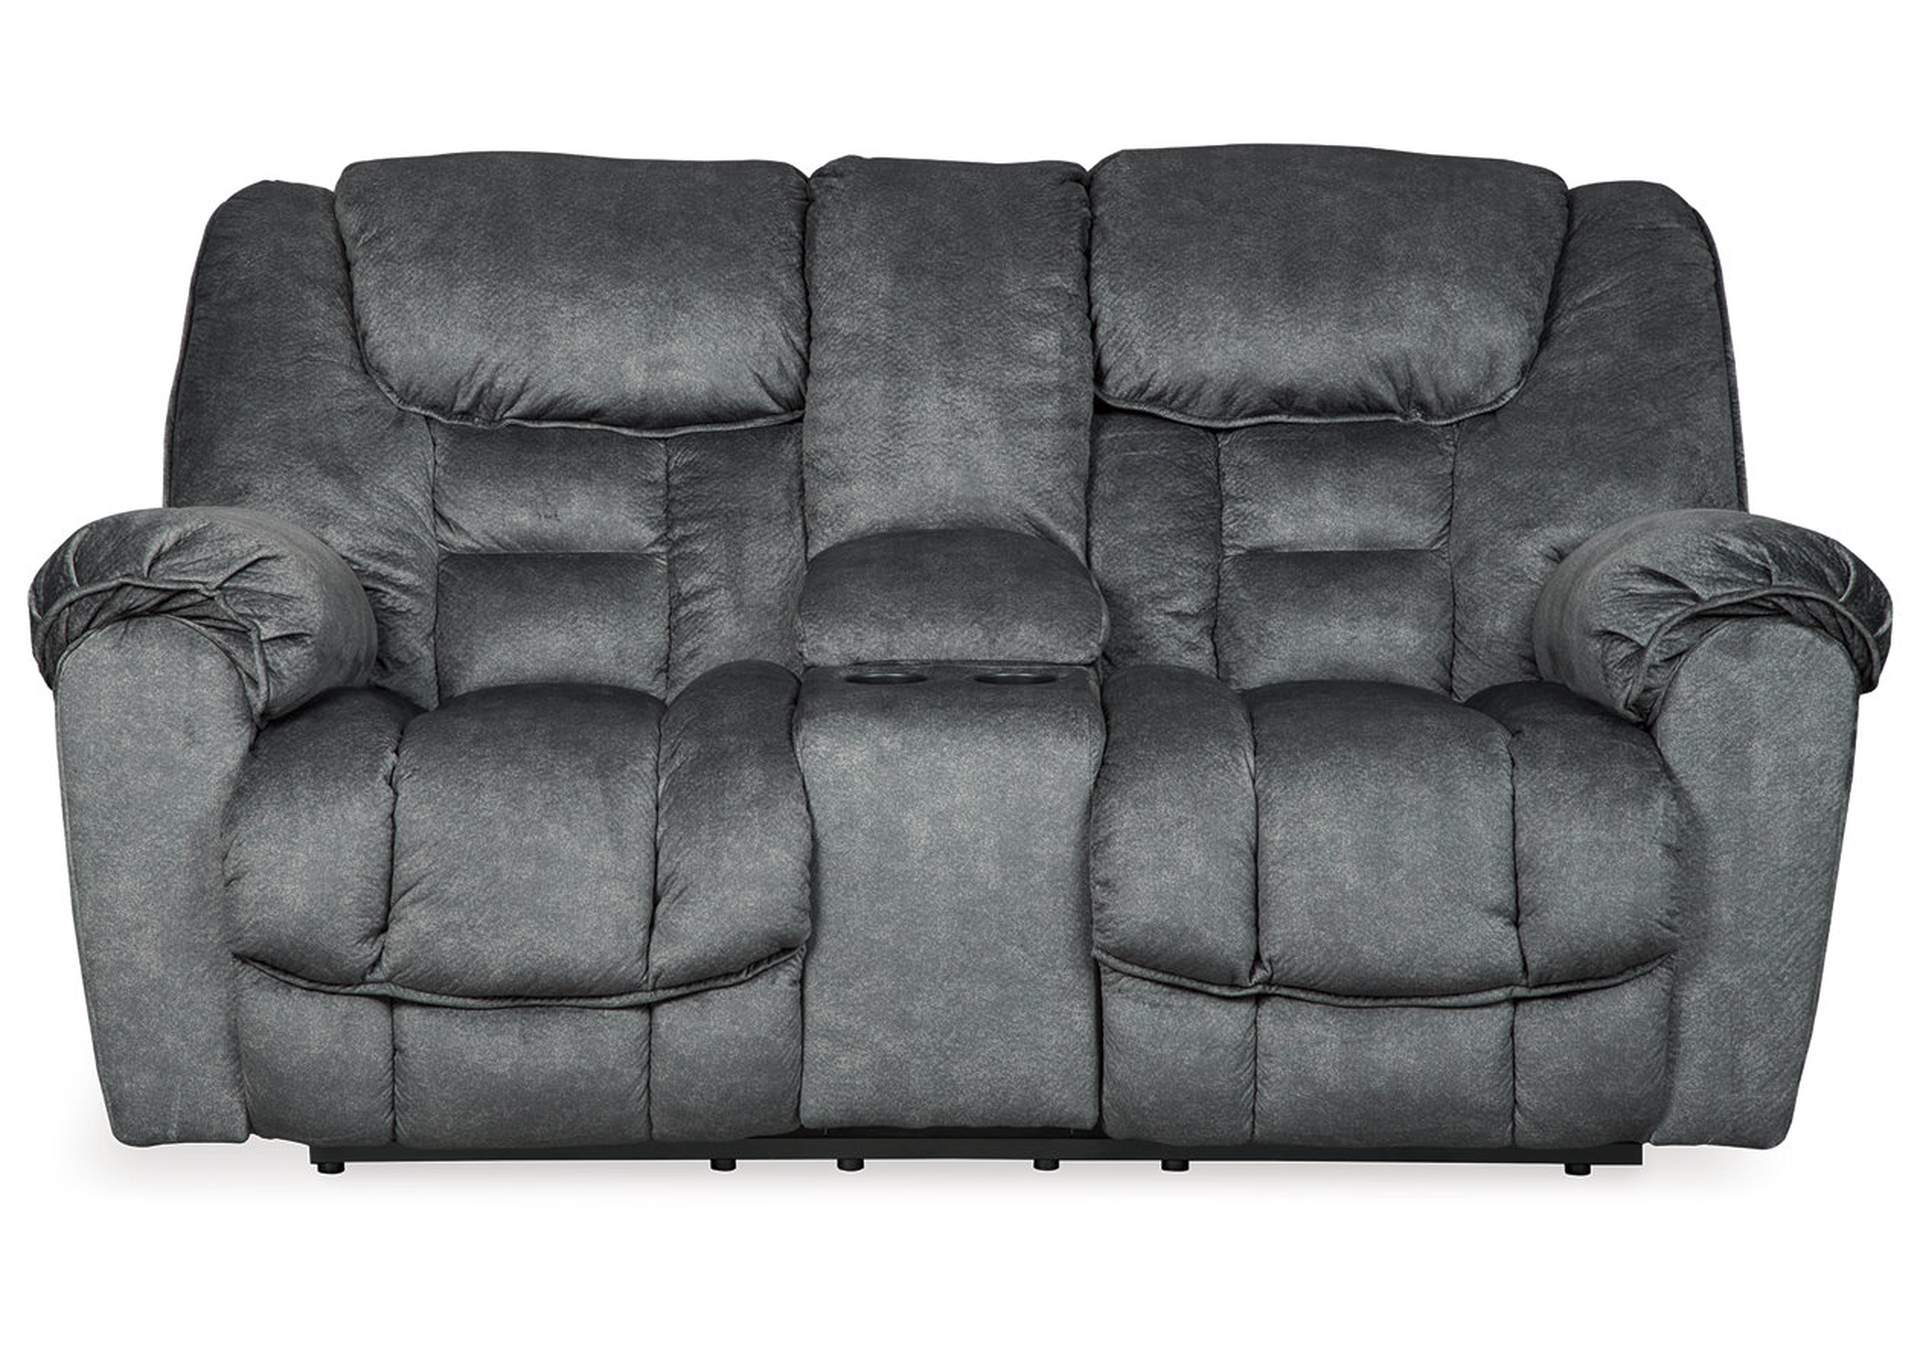 Capehorn Sofa, Loveseat and Recliner,Signature Design By Ashley